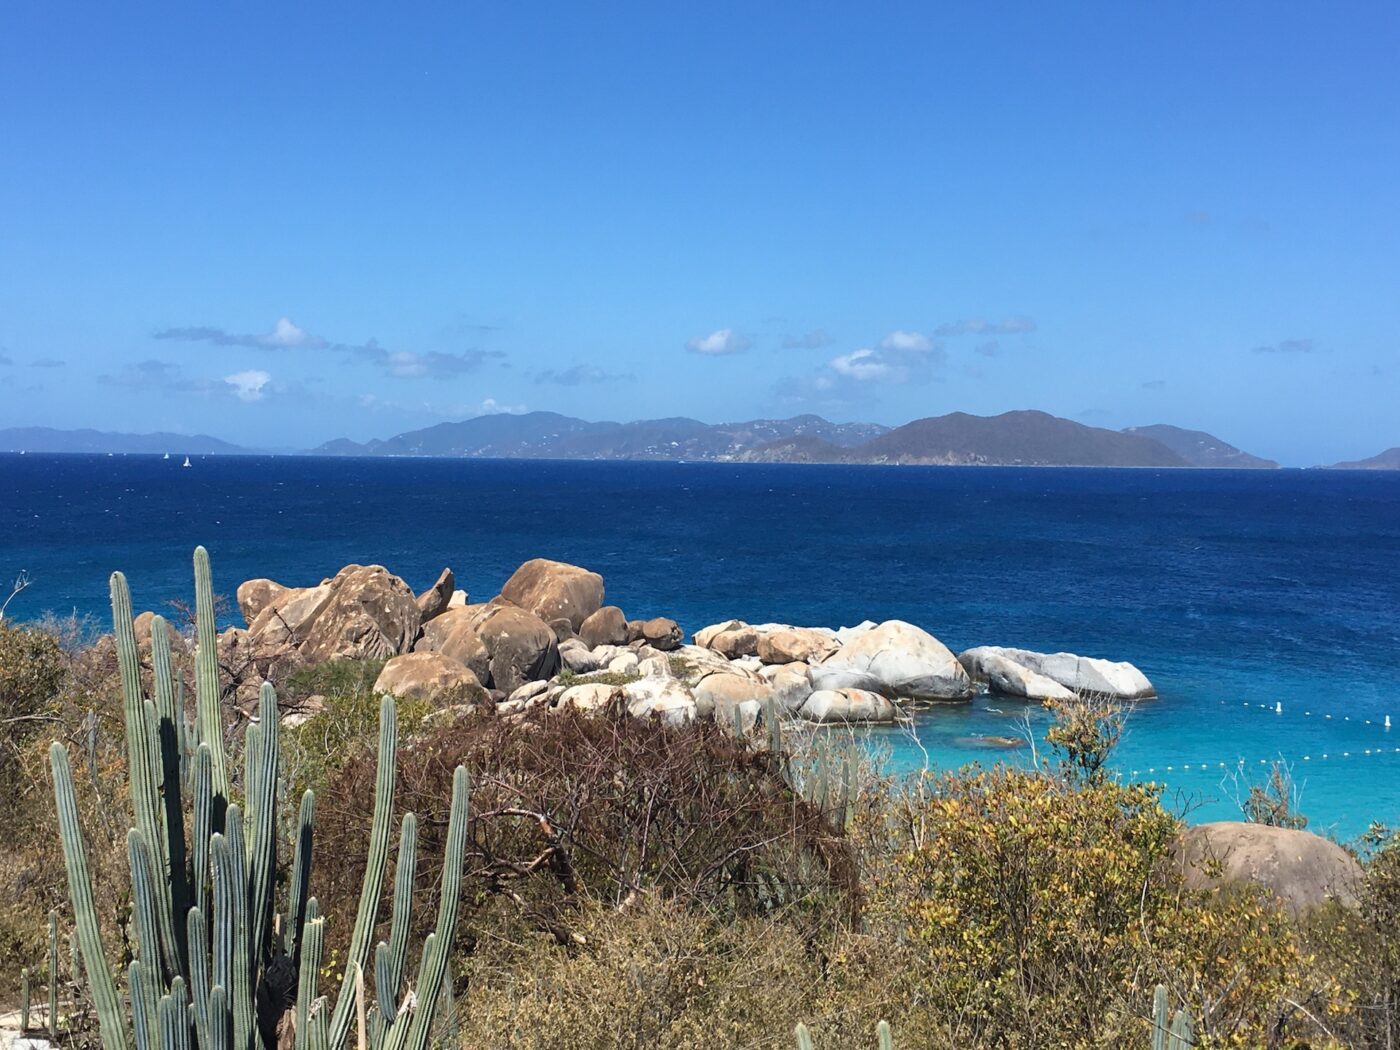 Vista of Caribbean from a rocky shore with desert like cactus in foreground of an unknown island. April, 2022. Beyond is the blue ocean and another island several miles away.